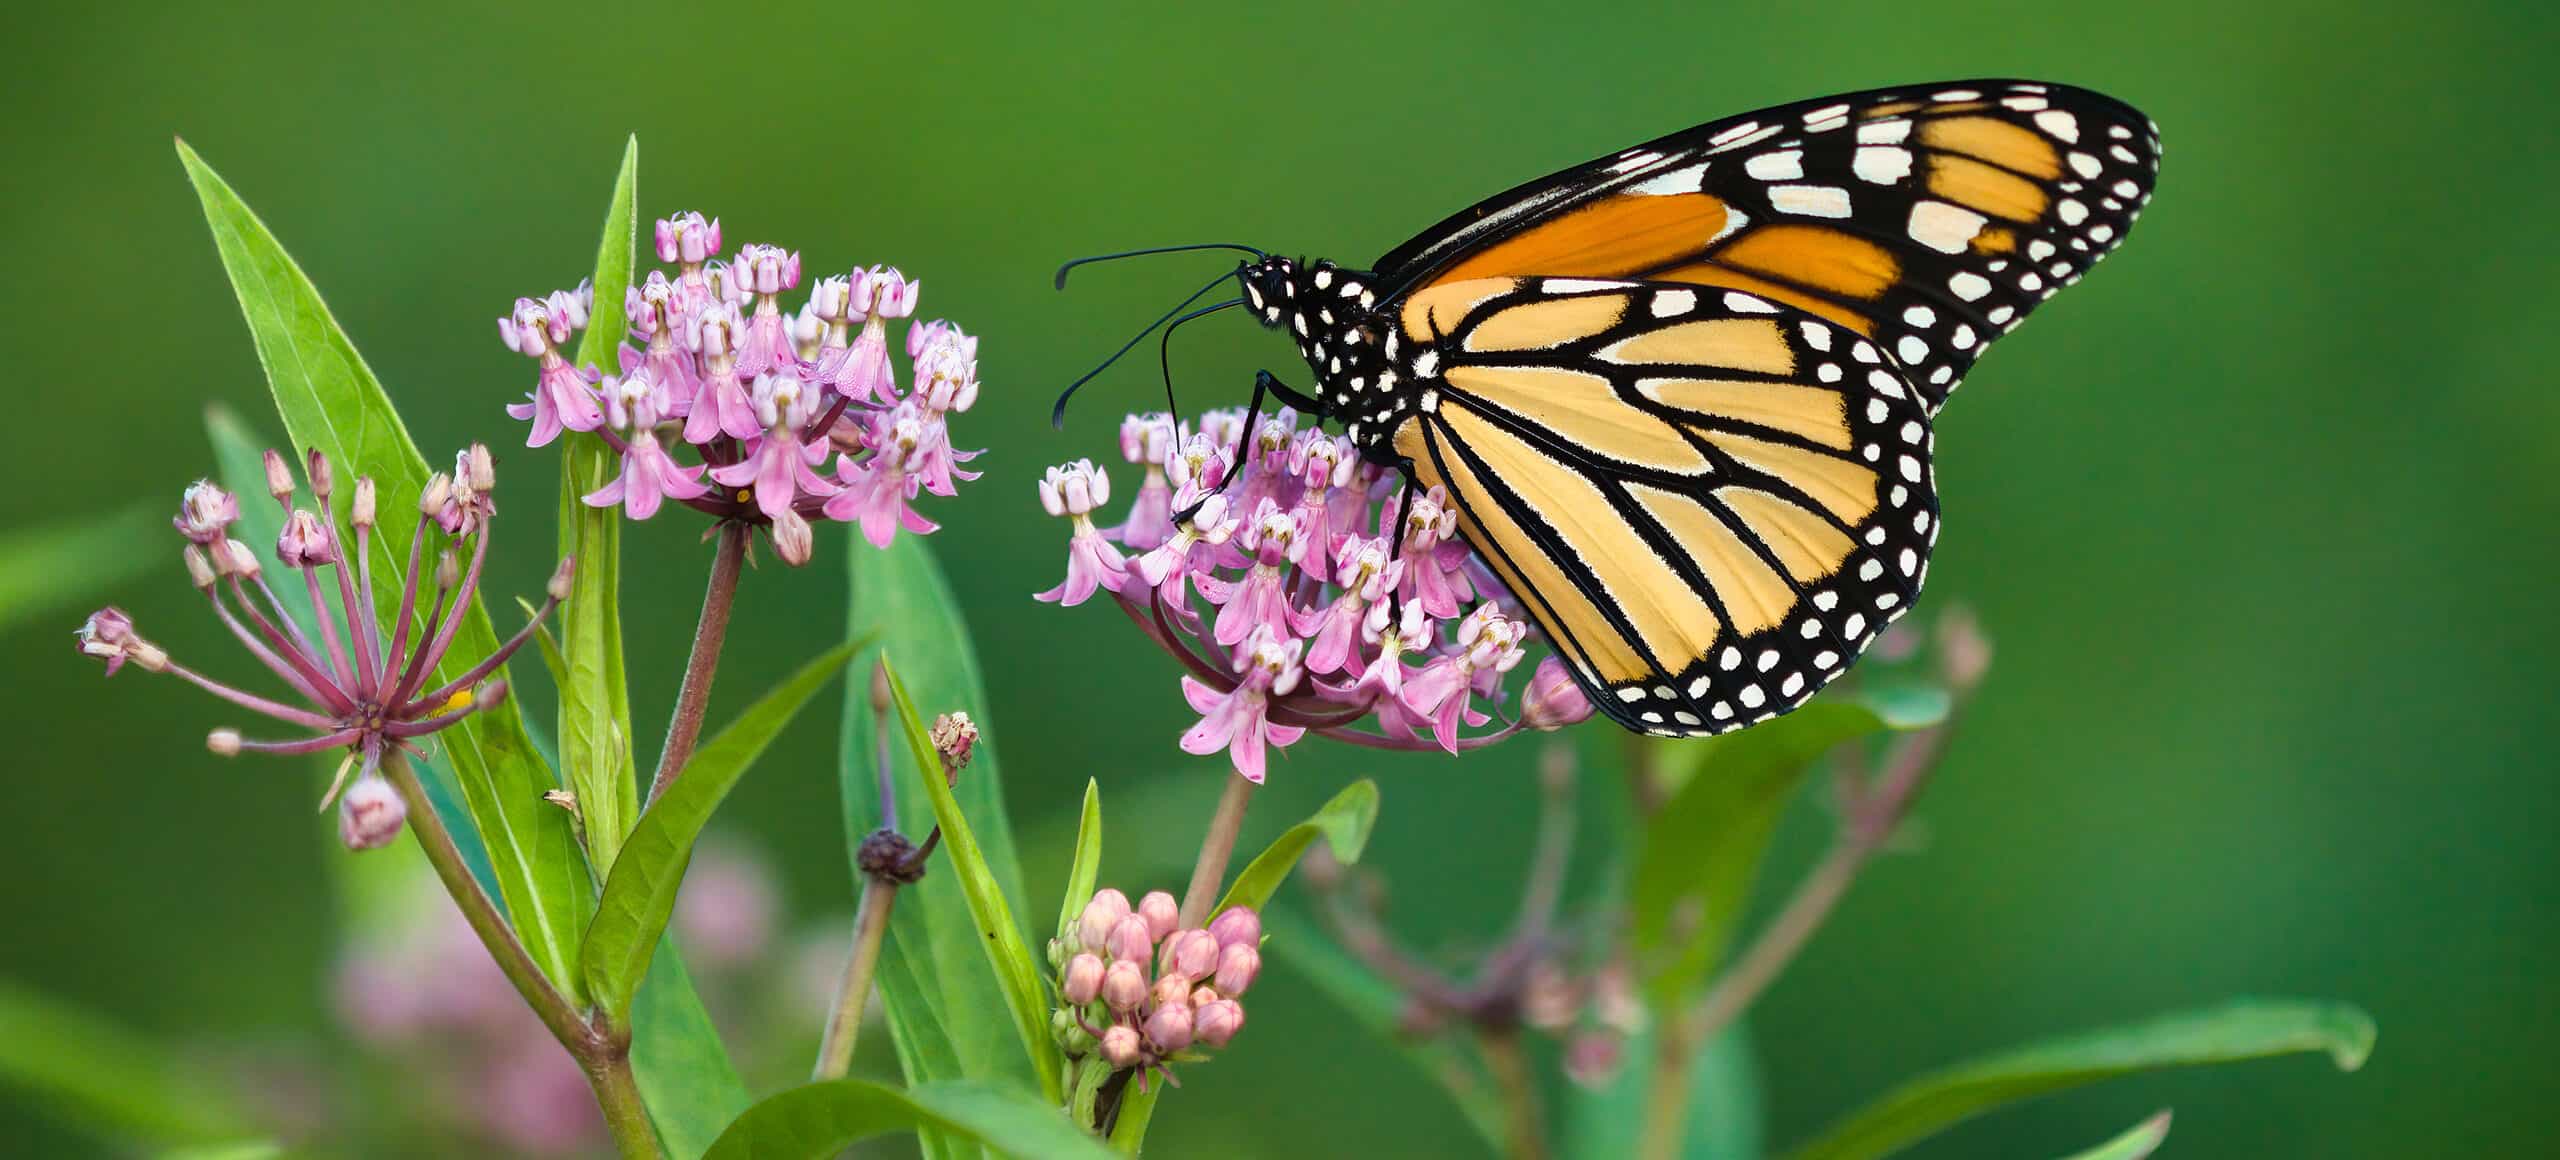 Monarch butterfly on milkweed plant